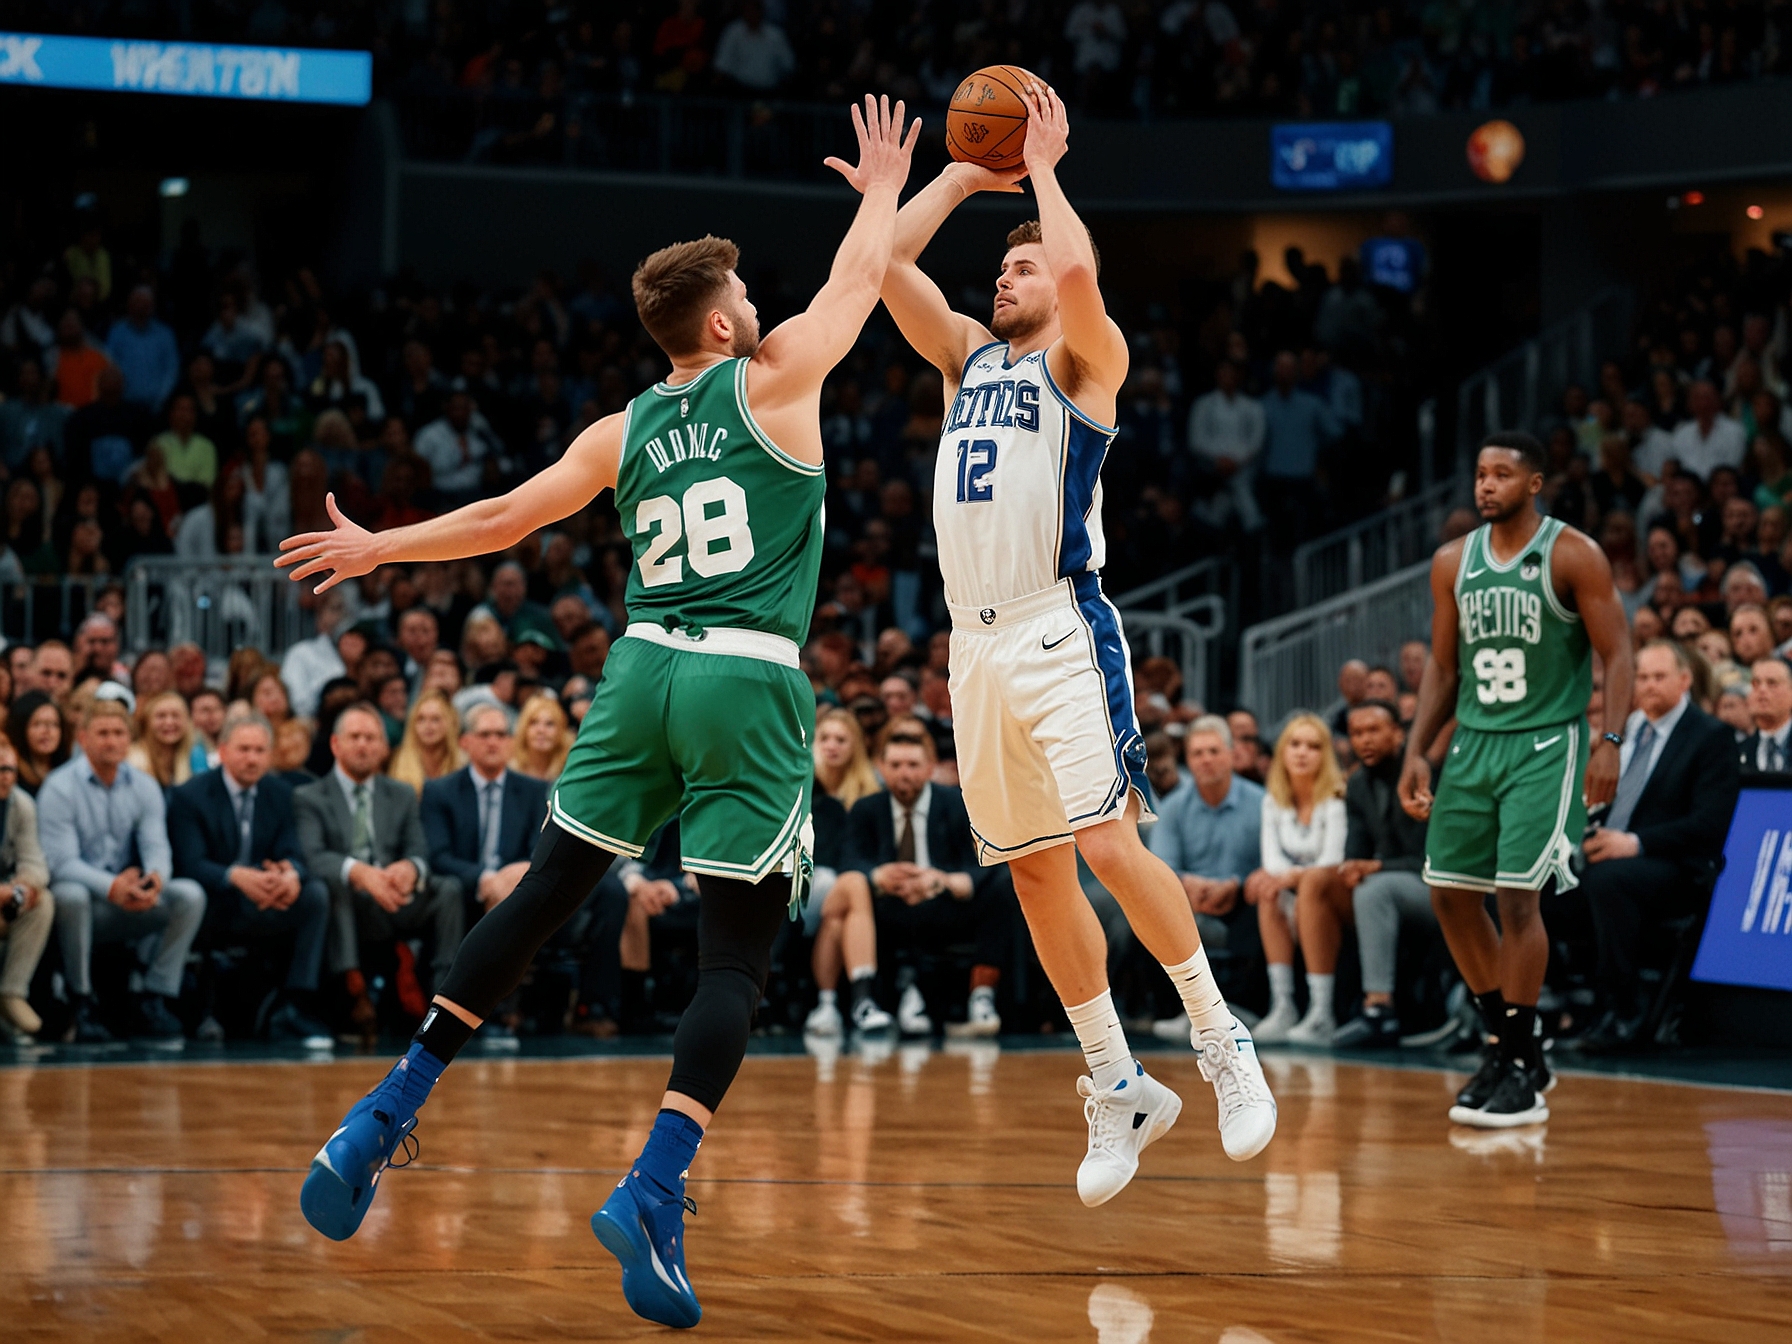 Luka Doncic attempts a jump shot while being closely defended by a Boston Celtics player, highlighting his struggle to find his rhythm in Game 5 of the NBA Finals.